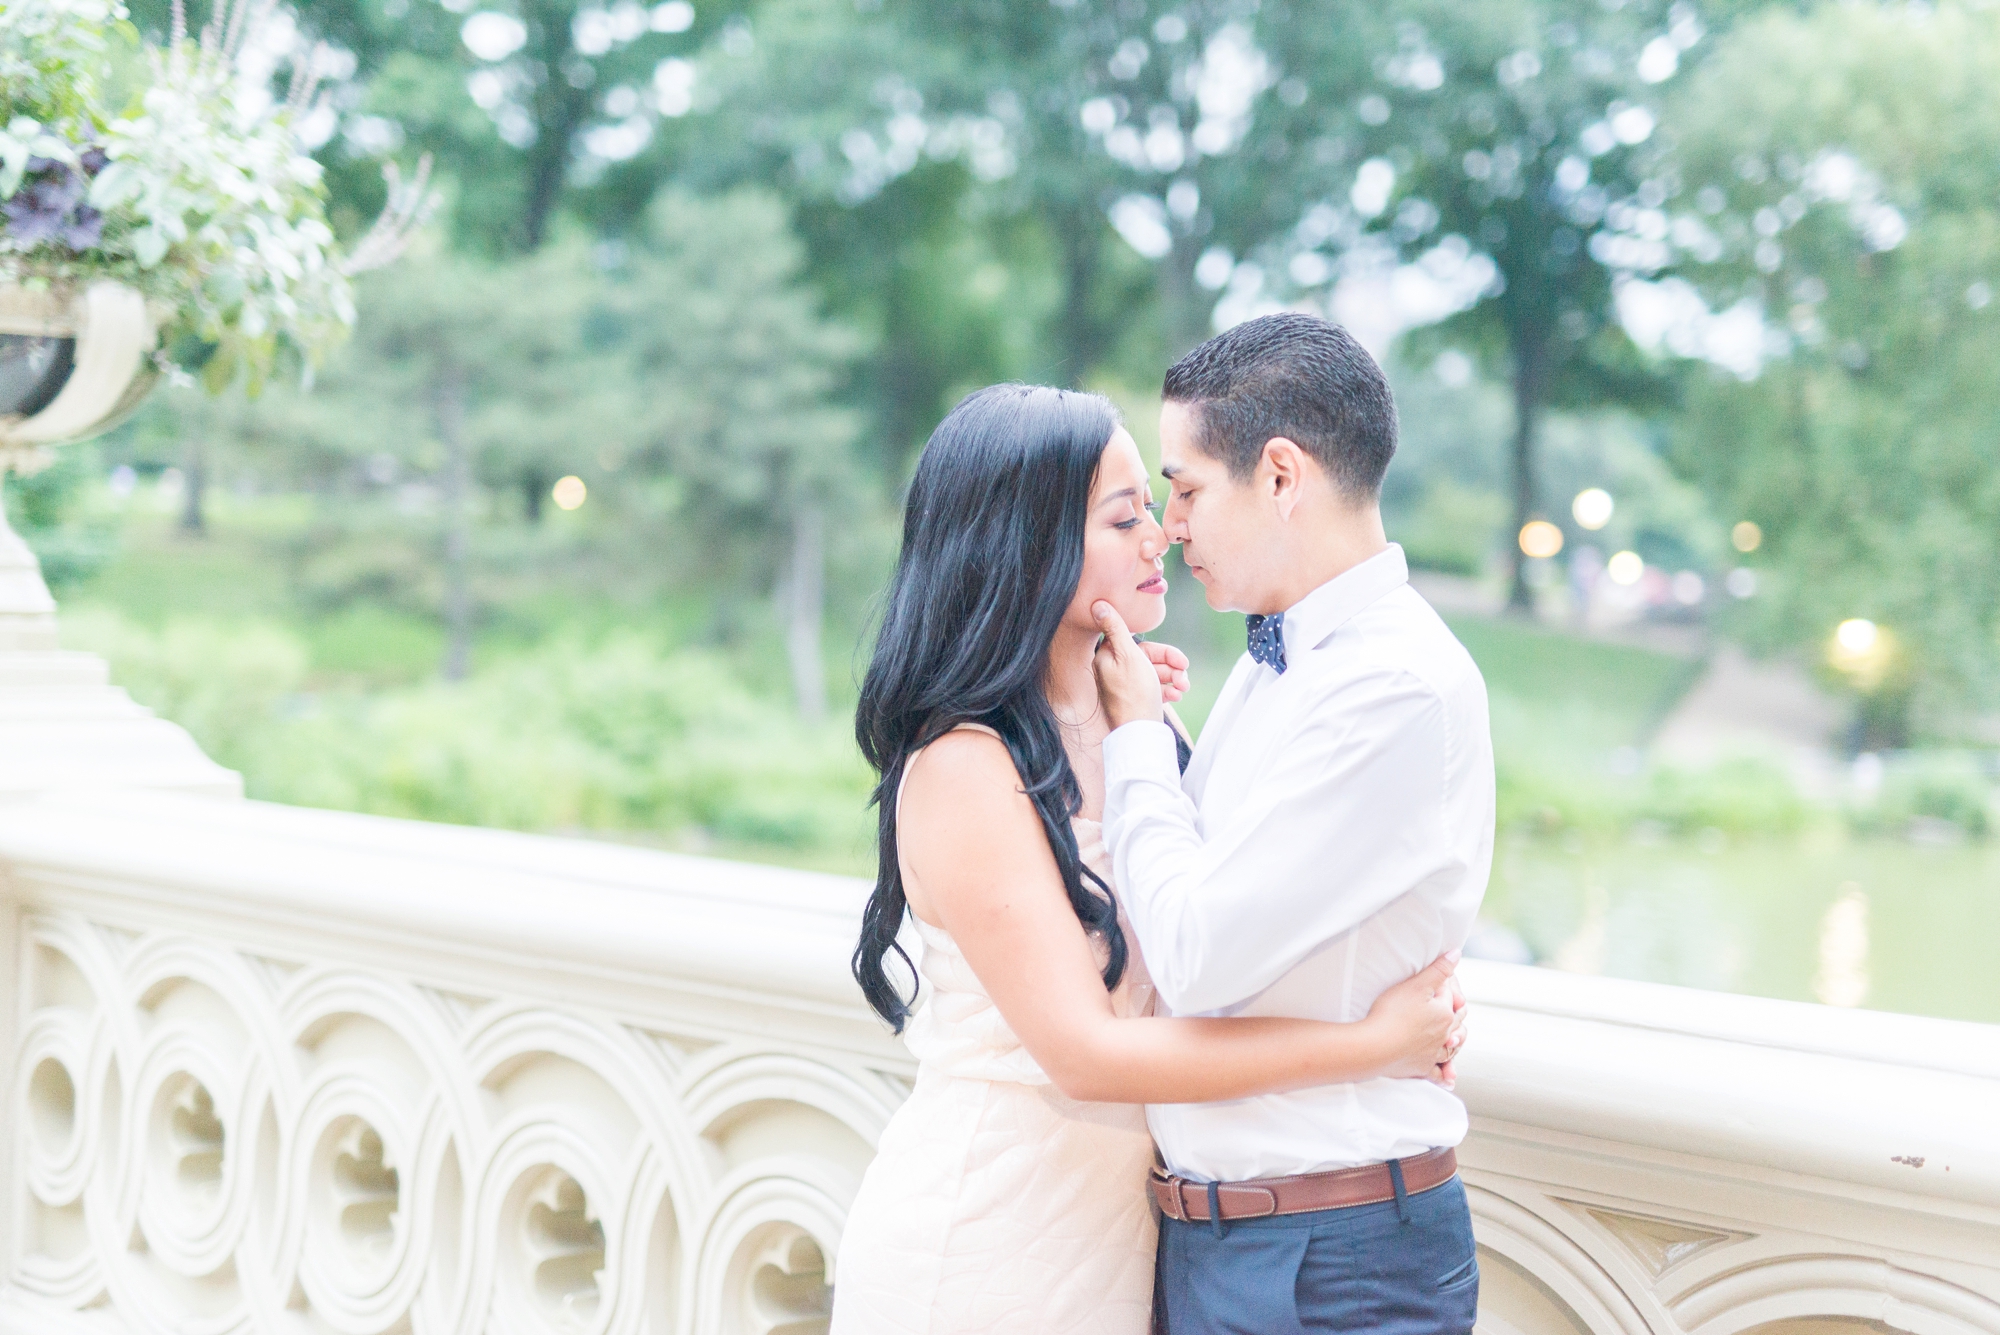 wedding-photography-in-central-park-new-york-city_0225